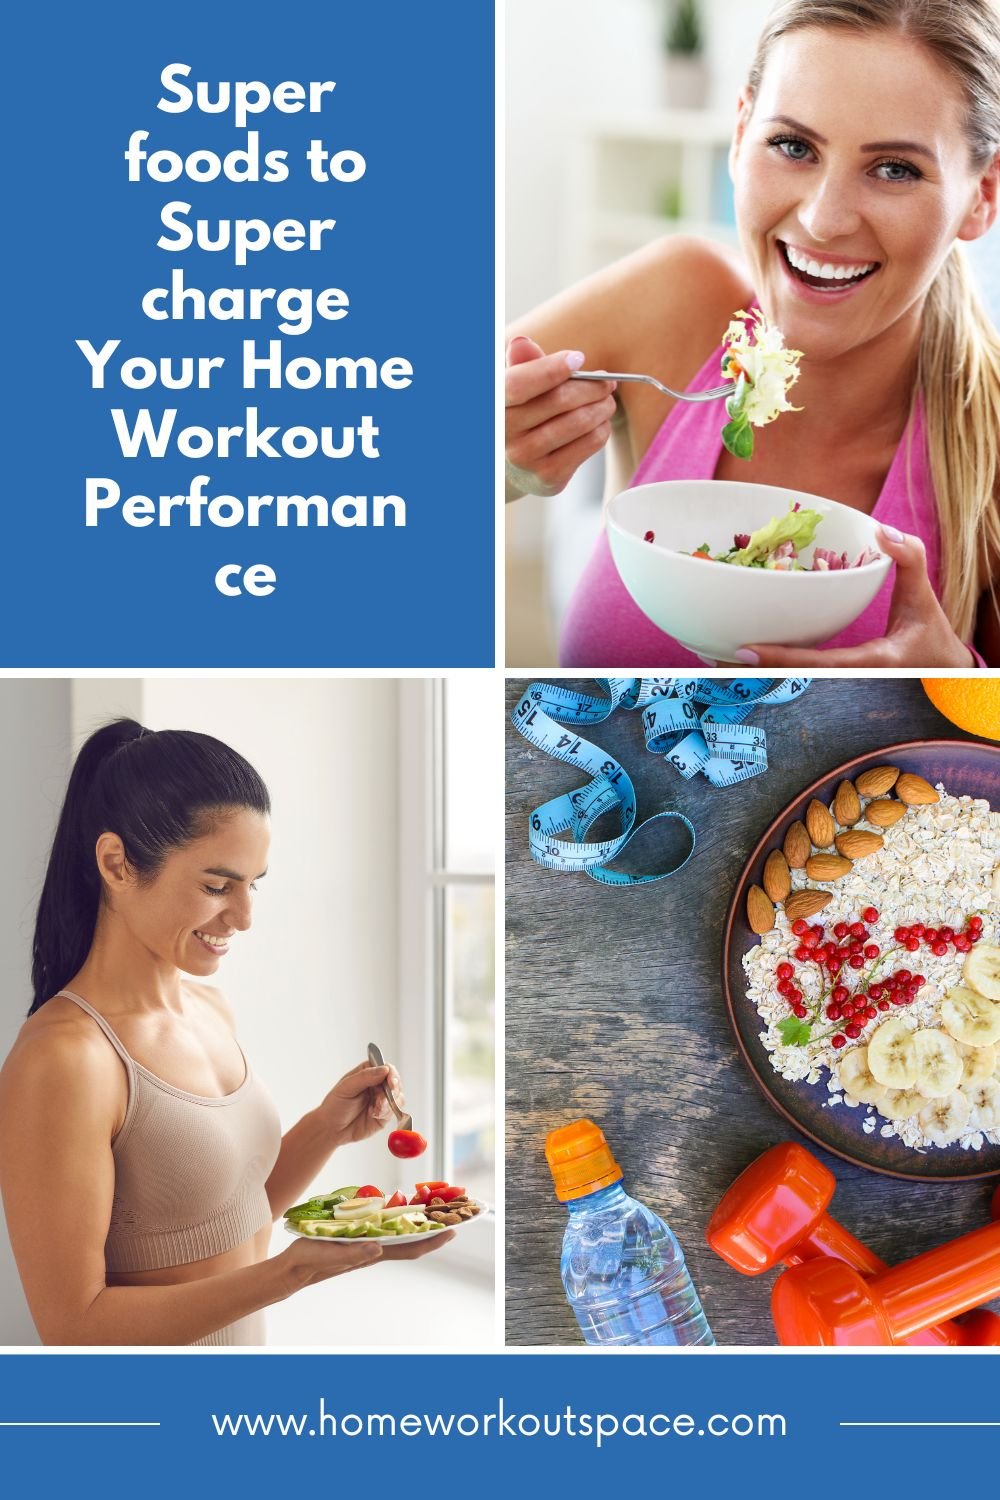 Superfoods to Supercharge Your Home Workout Performance